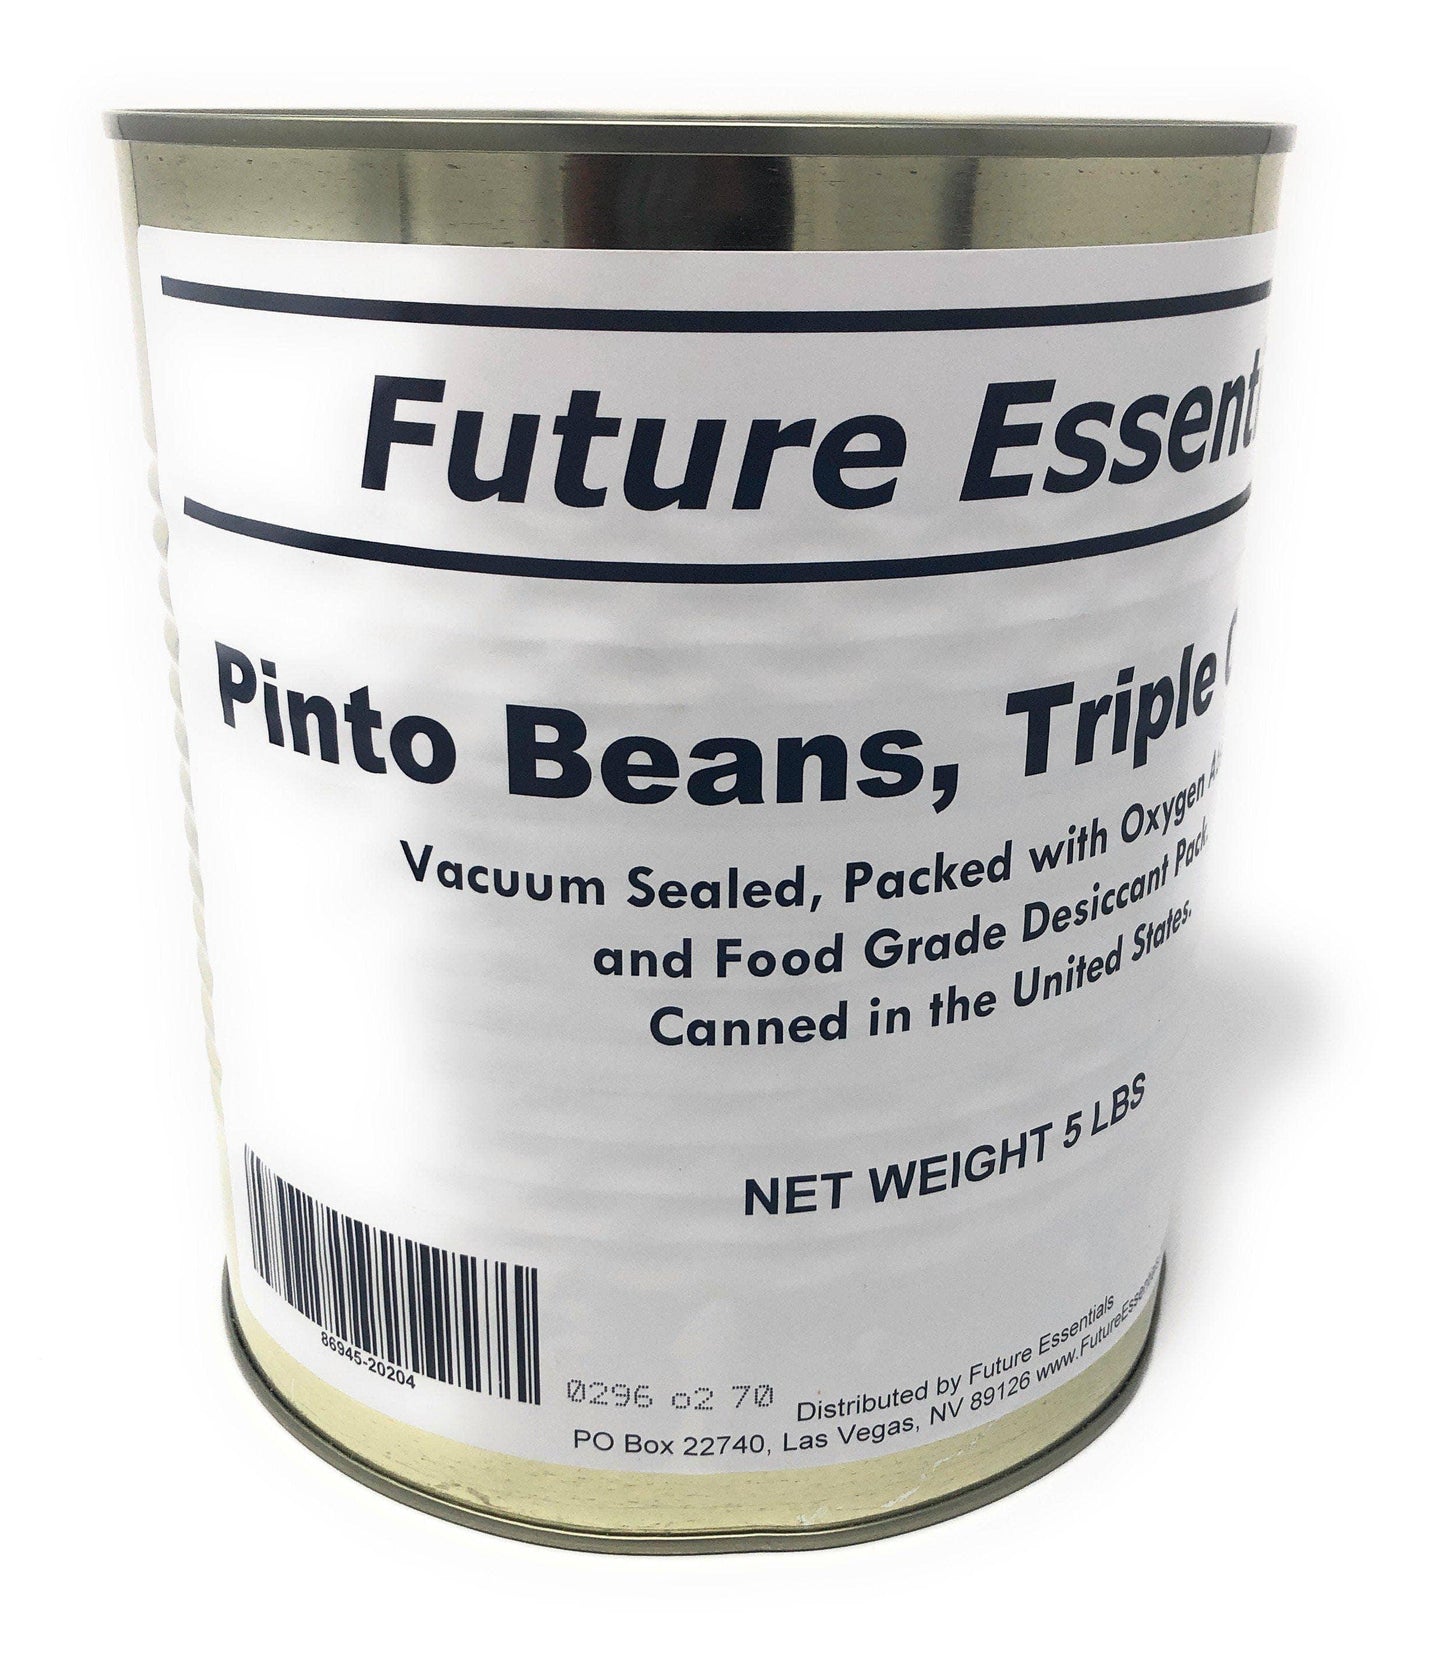 Case of Future Essentials Pinto Beans,(Case of 6 cans)